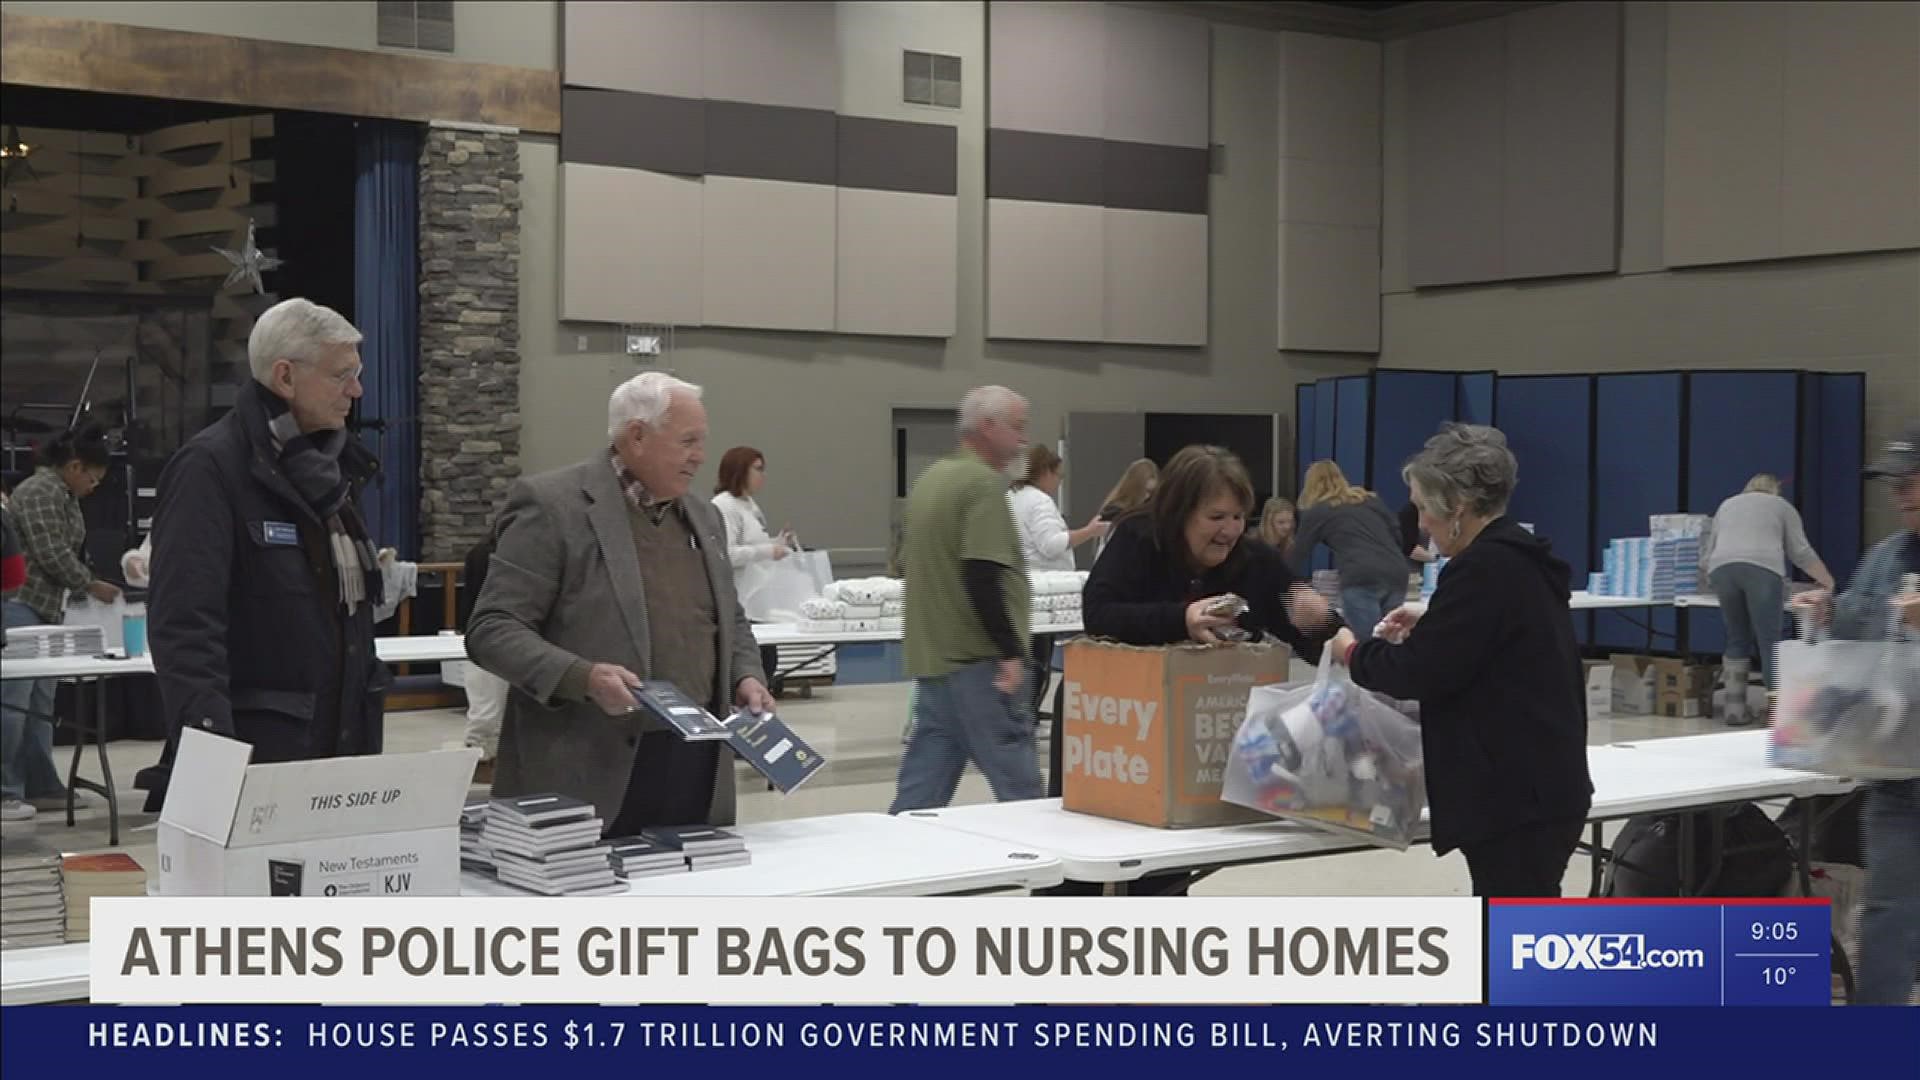 Lt. Katrina Flanagan and Athens Police Department is gifting over 450 bags to local nursing homes. This is also made possible with the help of the community.